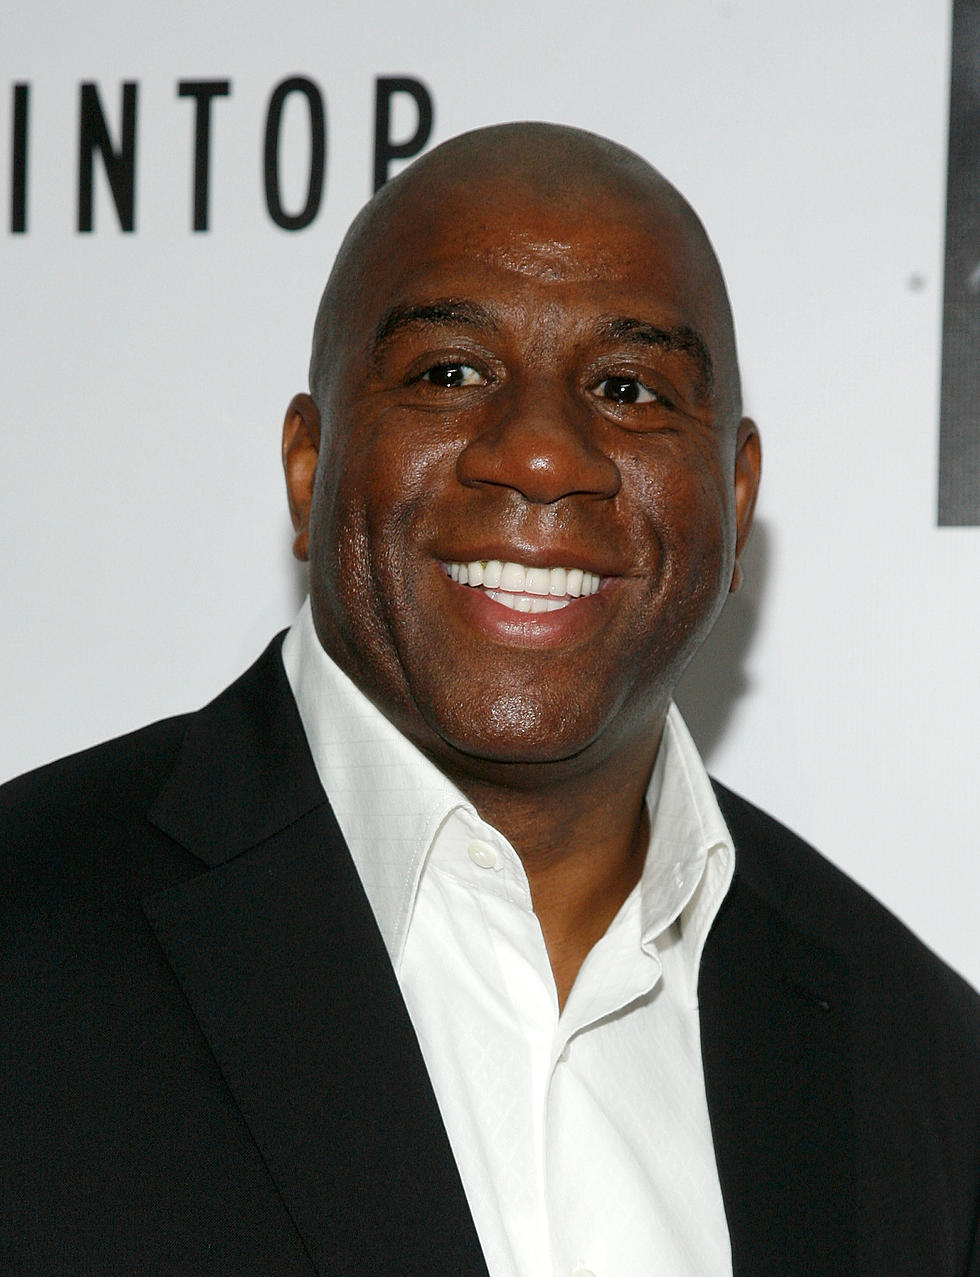 Magic Johnson on How He Has Lived With HIV for 20 Years.